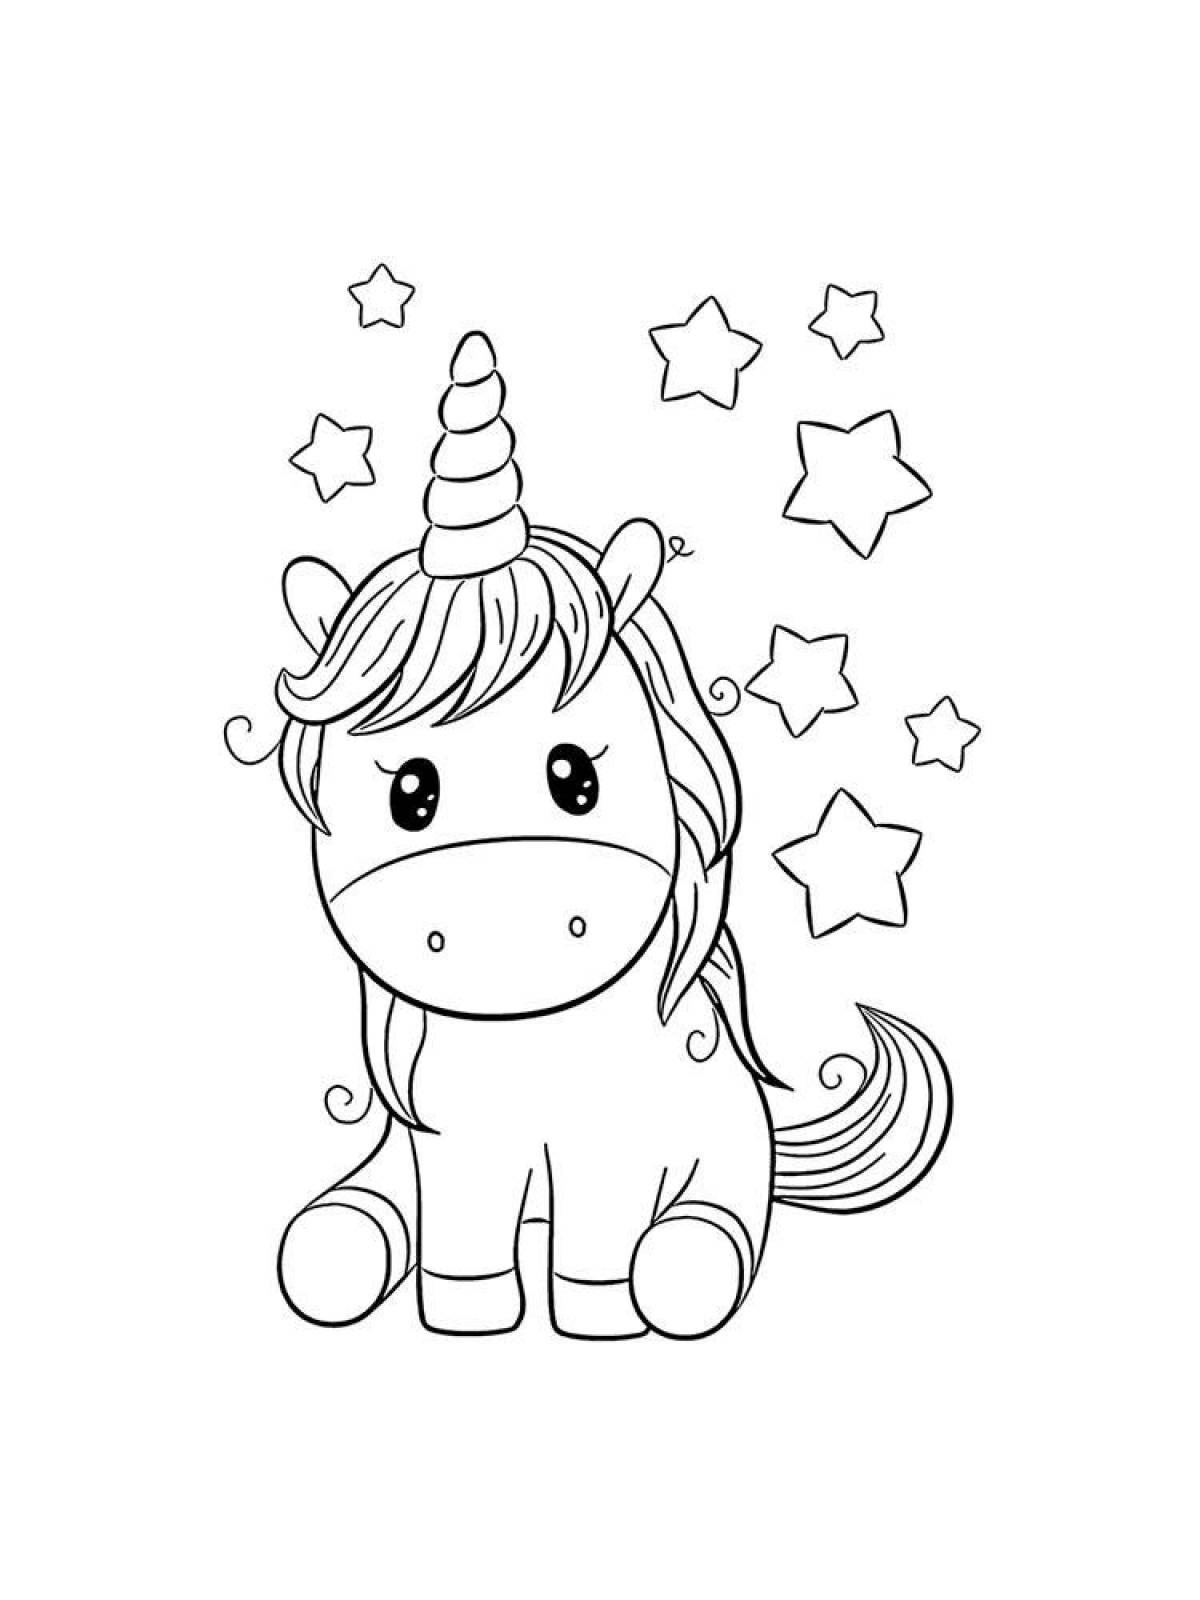 Adorable unicorn coloring pages for girls